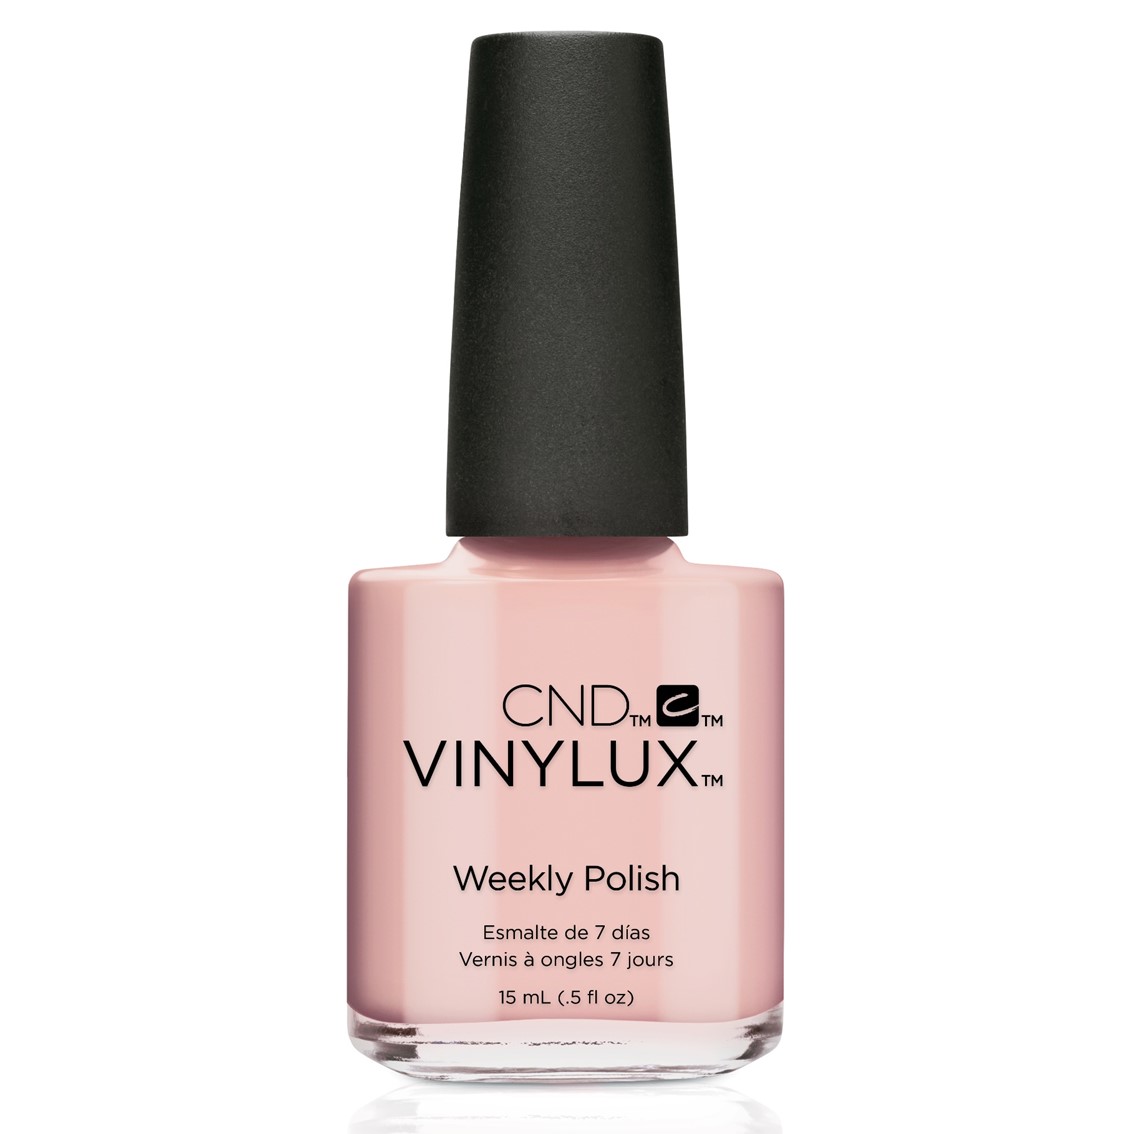 CND™ VINYLUX™ Uncovered